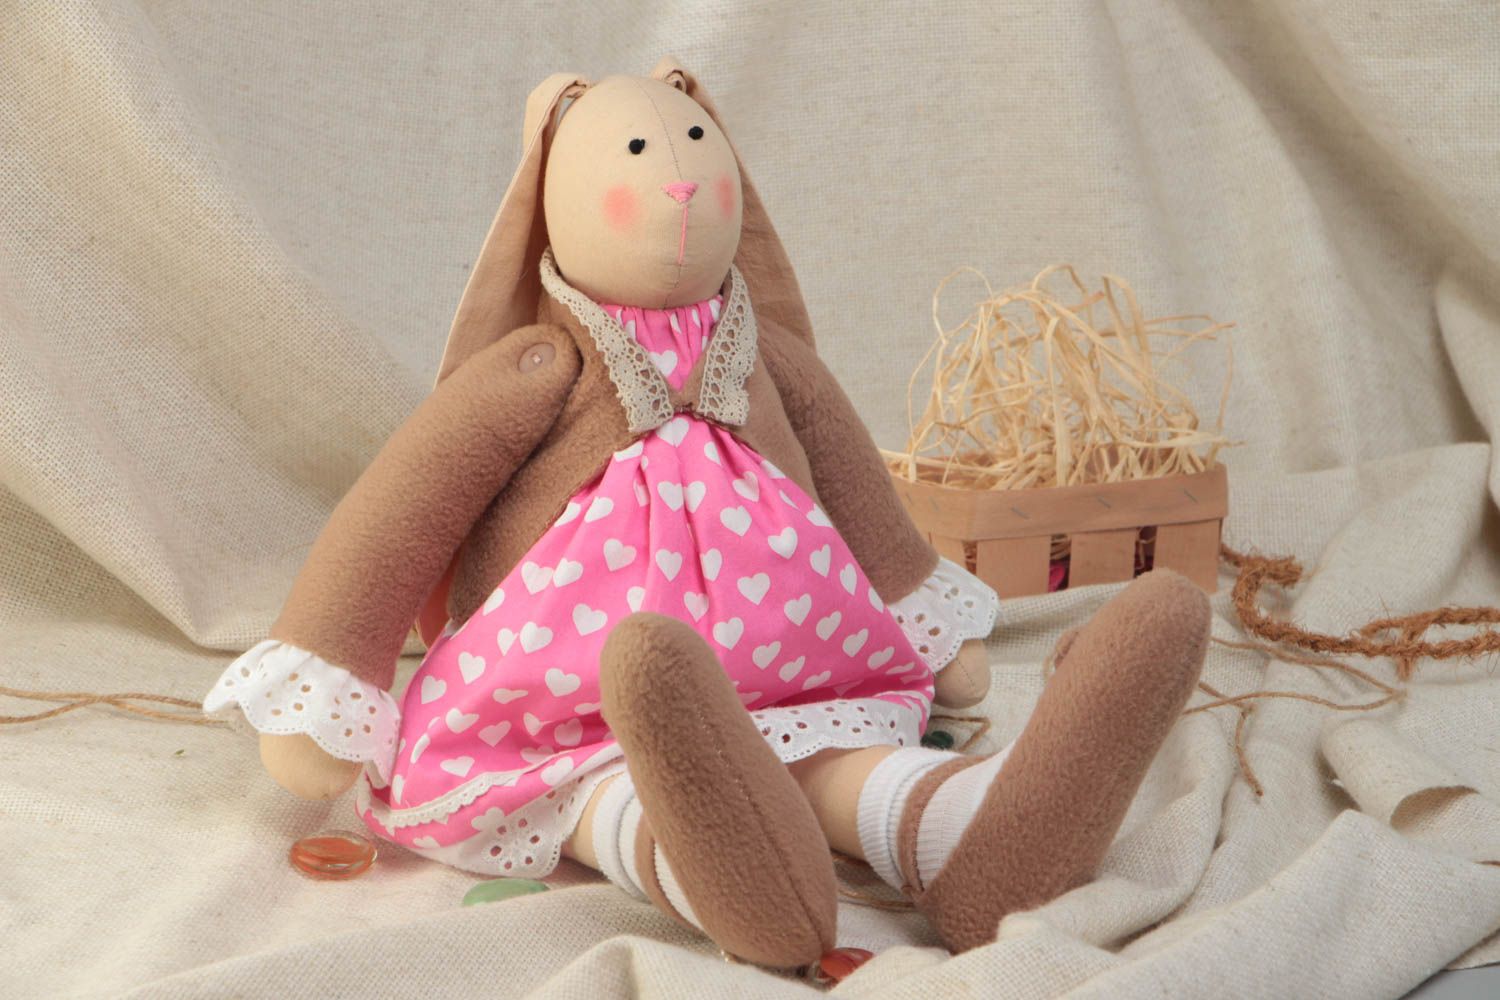 Handmade designer soft toy rabbit girl in pink dress with white hearts pattern photo 1